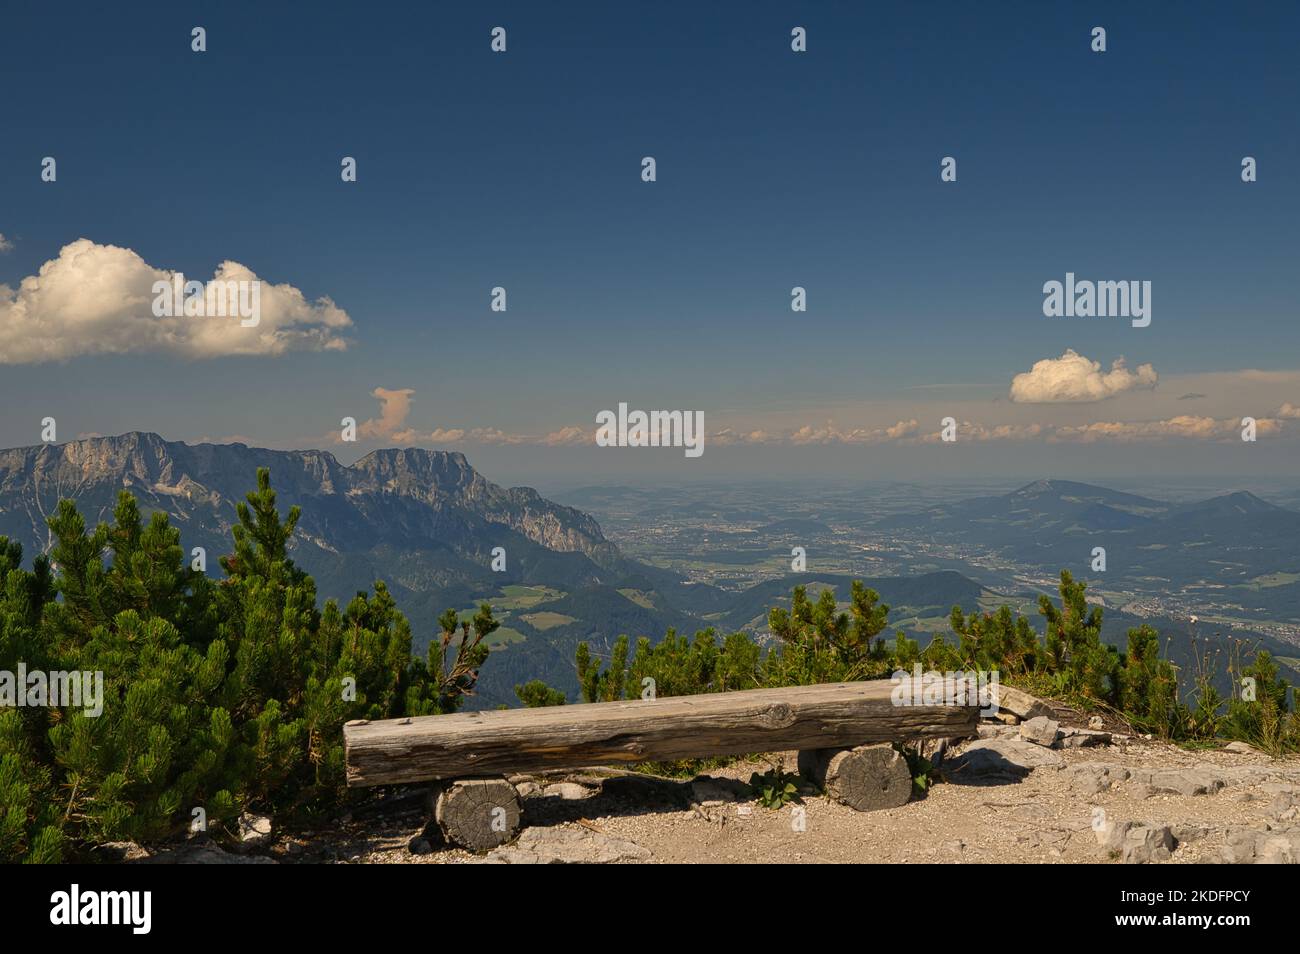 A bench made of wood with a beautiful view of the valley of Berchtesgaden Stock Photo